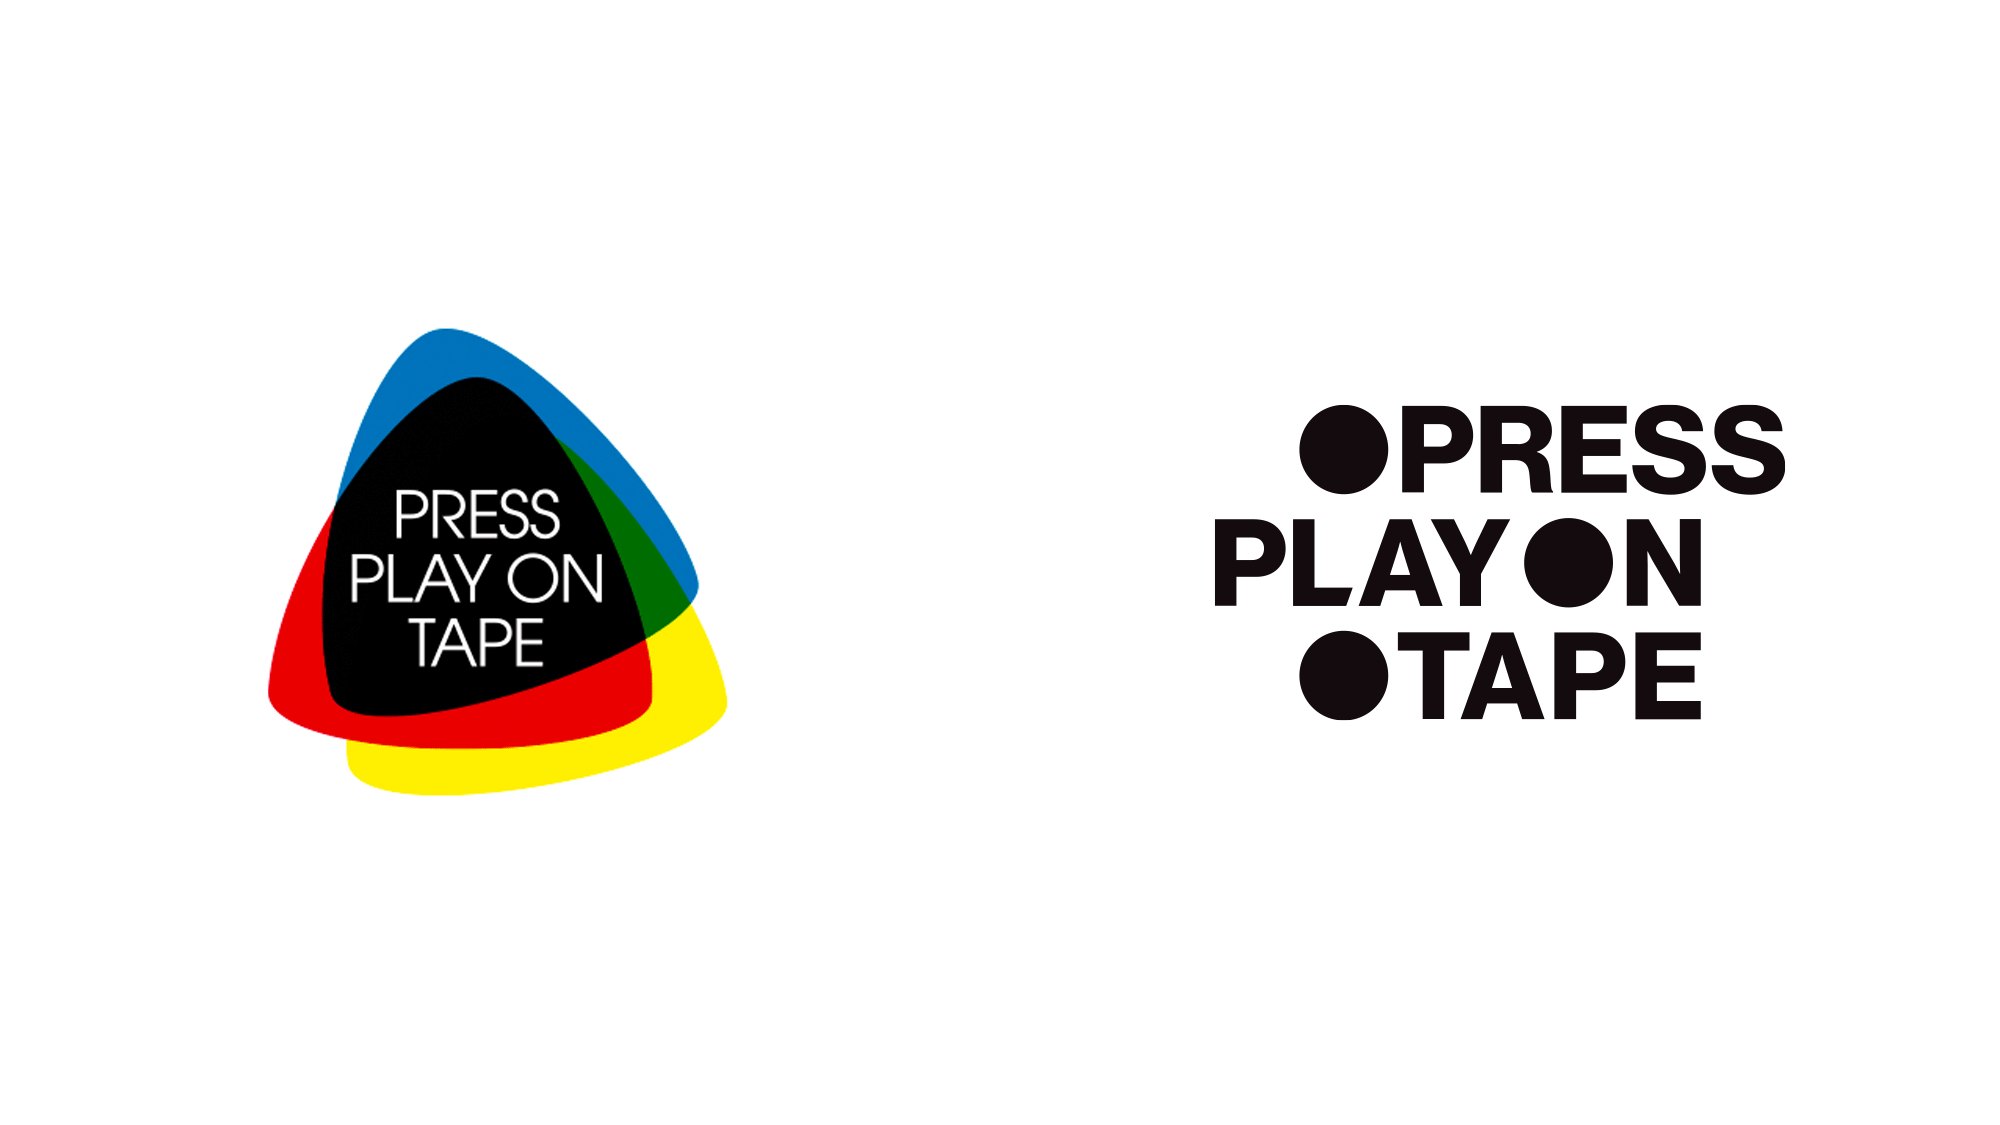 Press Play on Tape